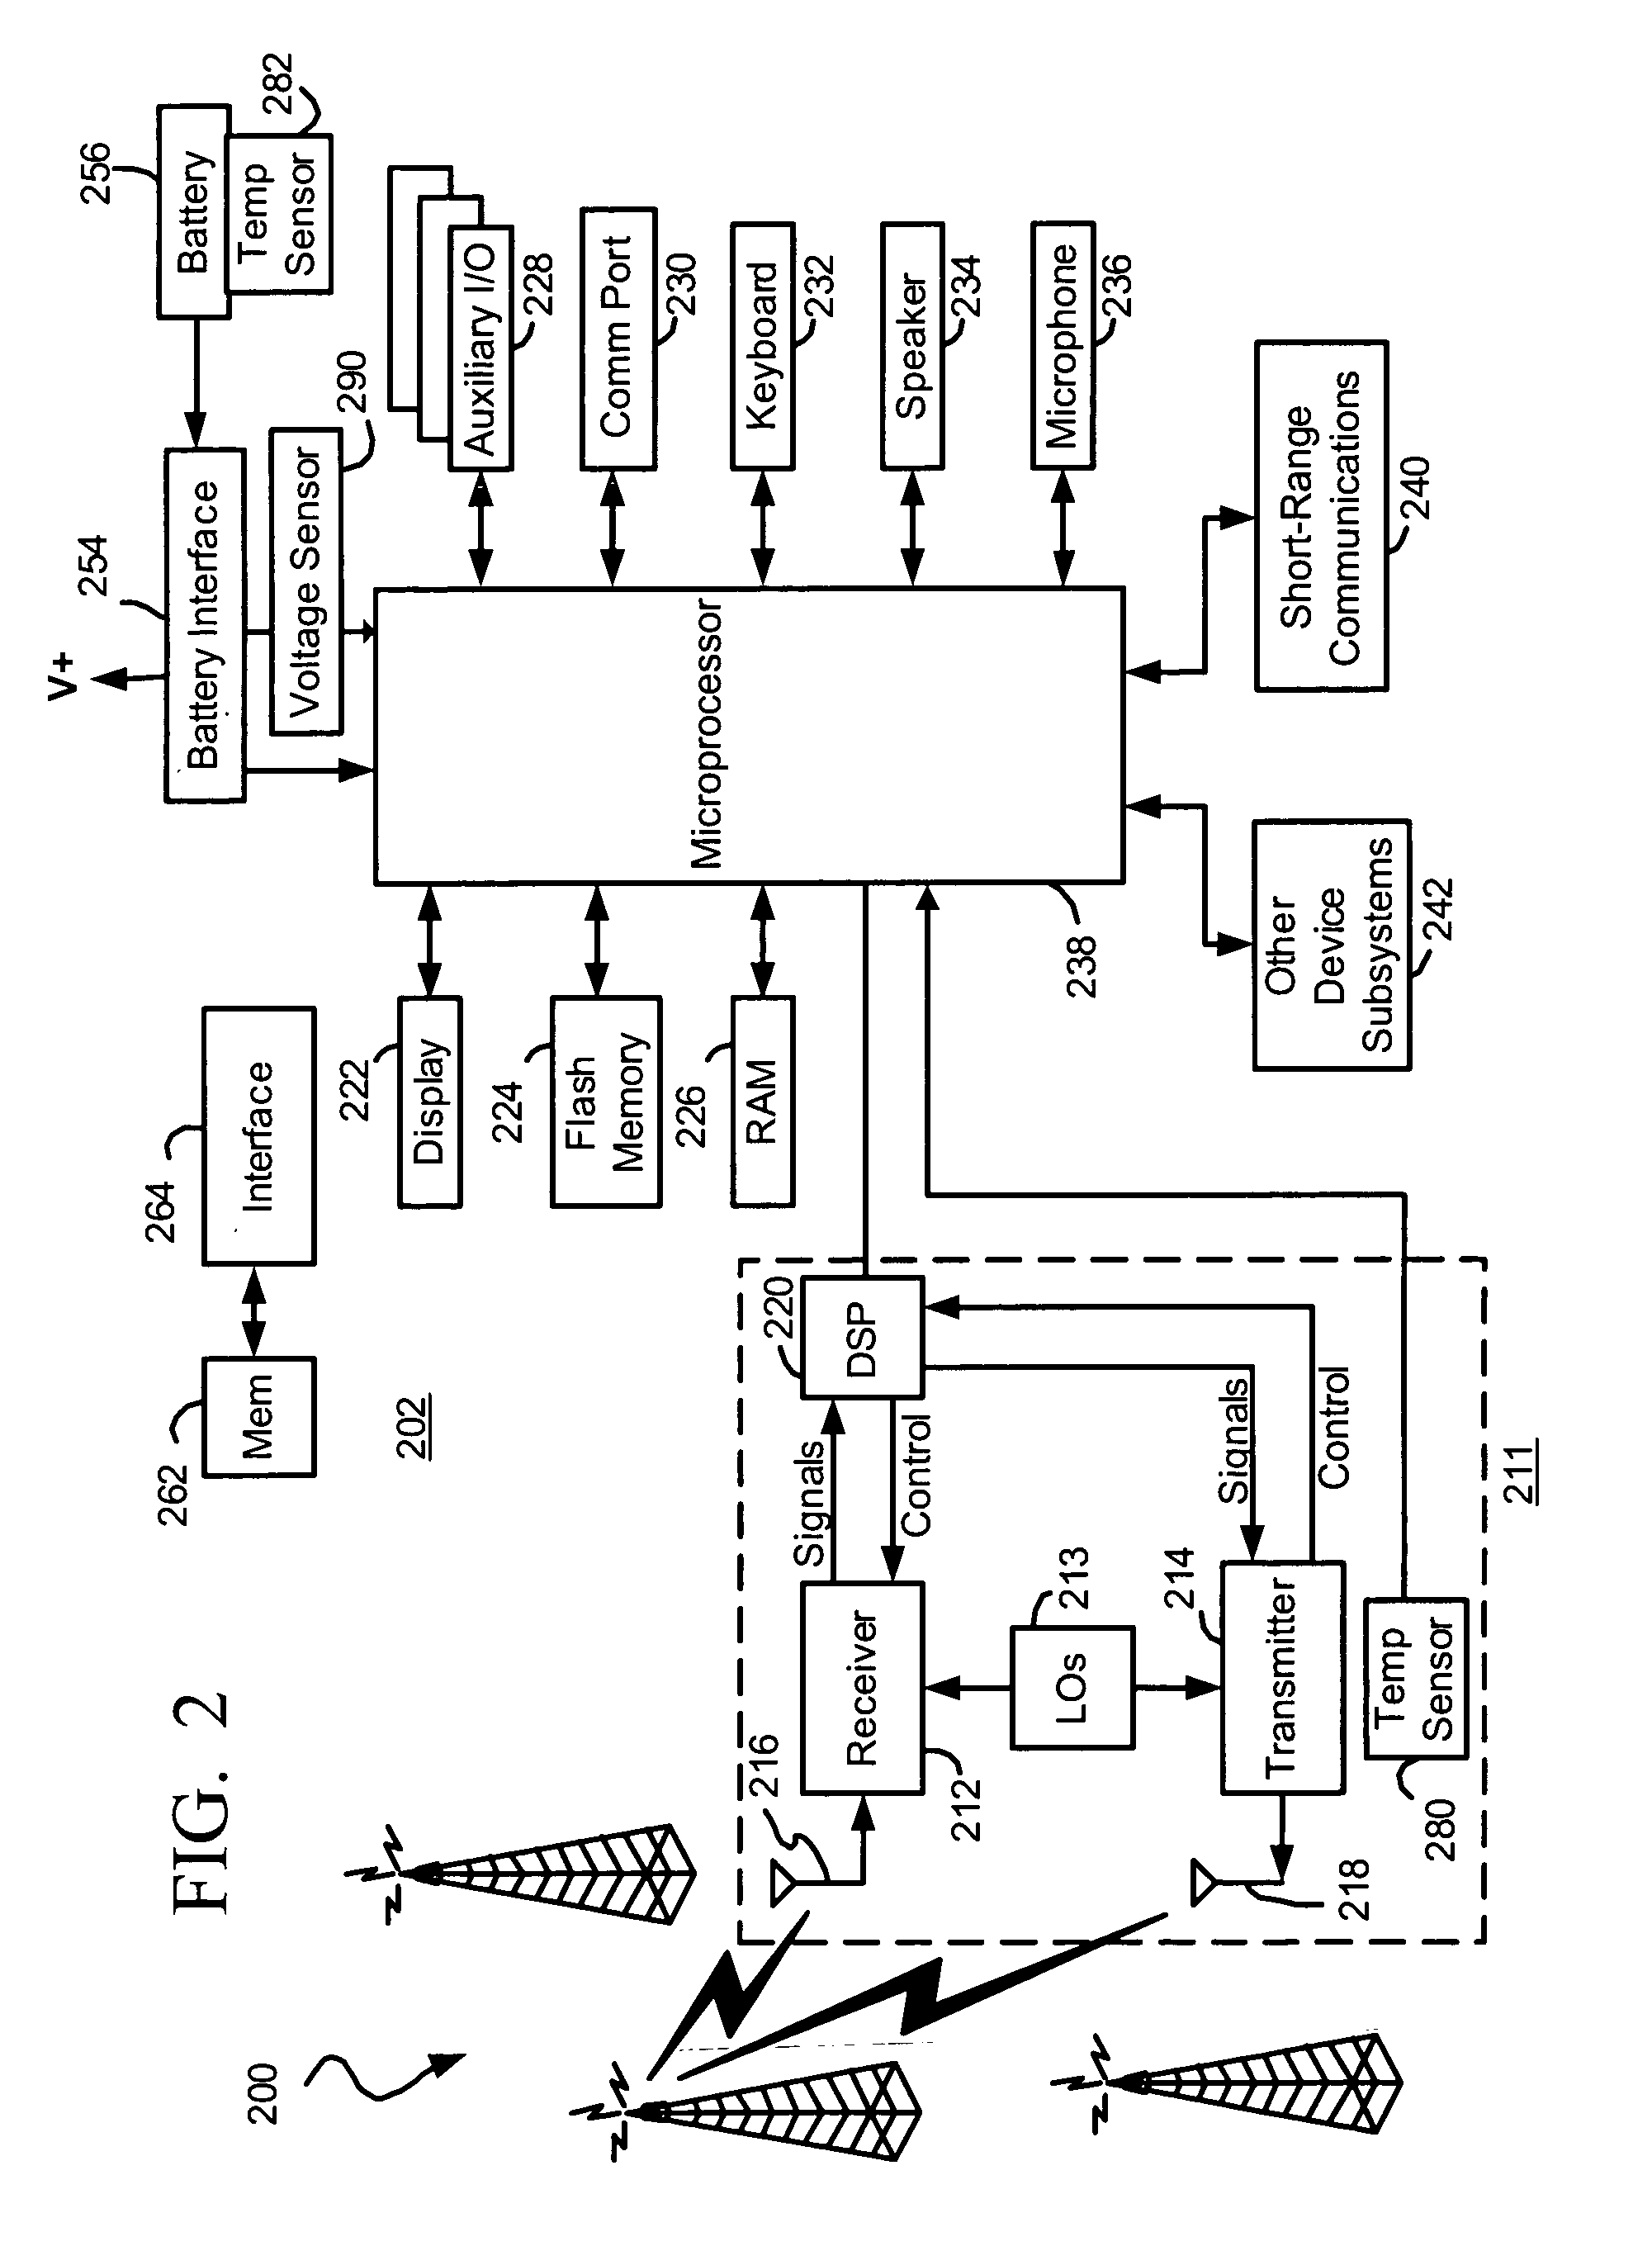 Methods and apparatus for limiting communication capabilities in mobile communication devices